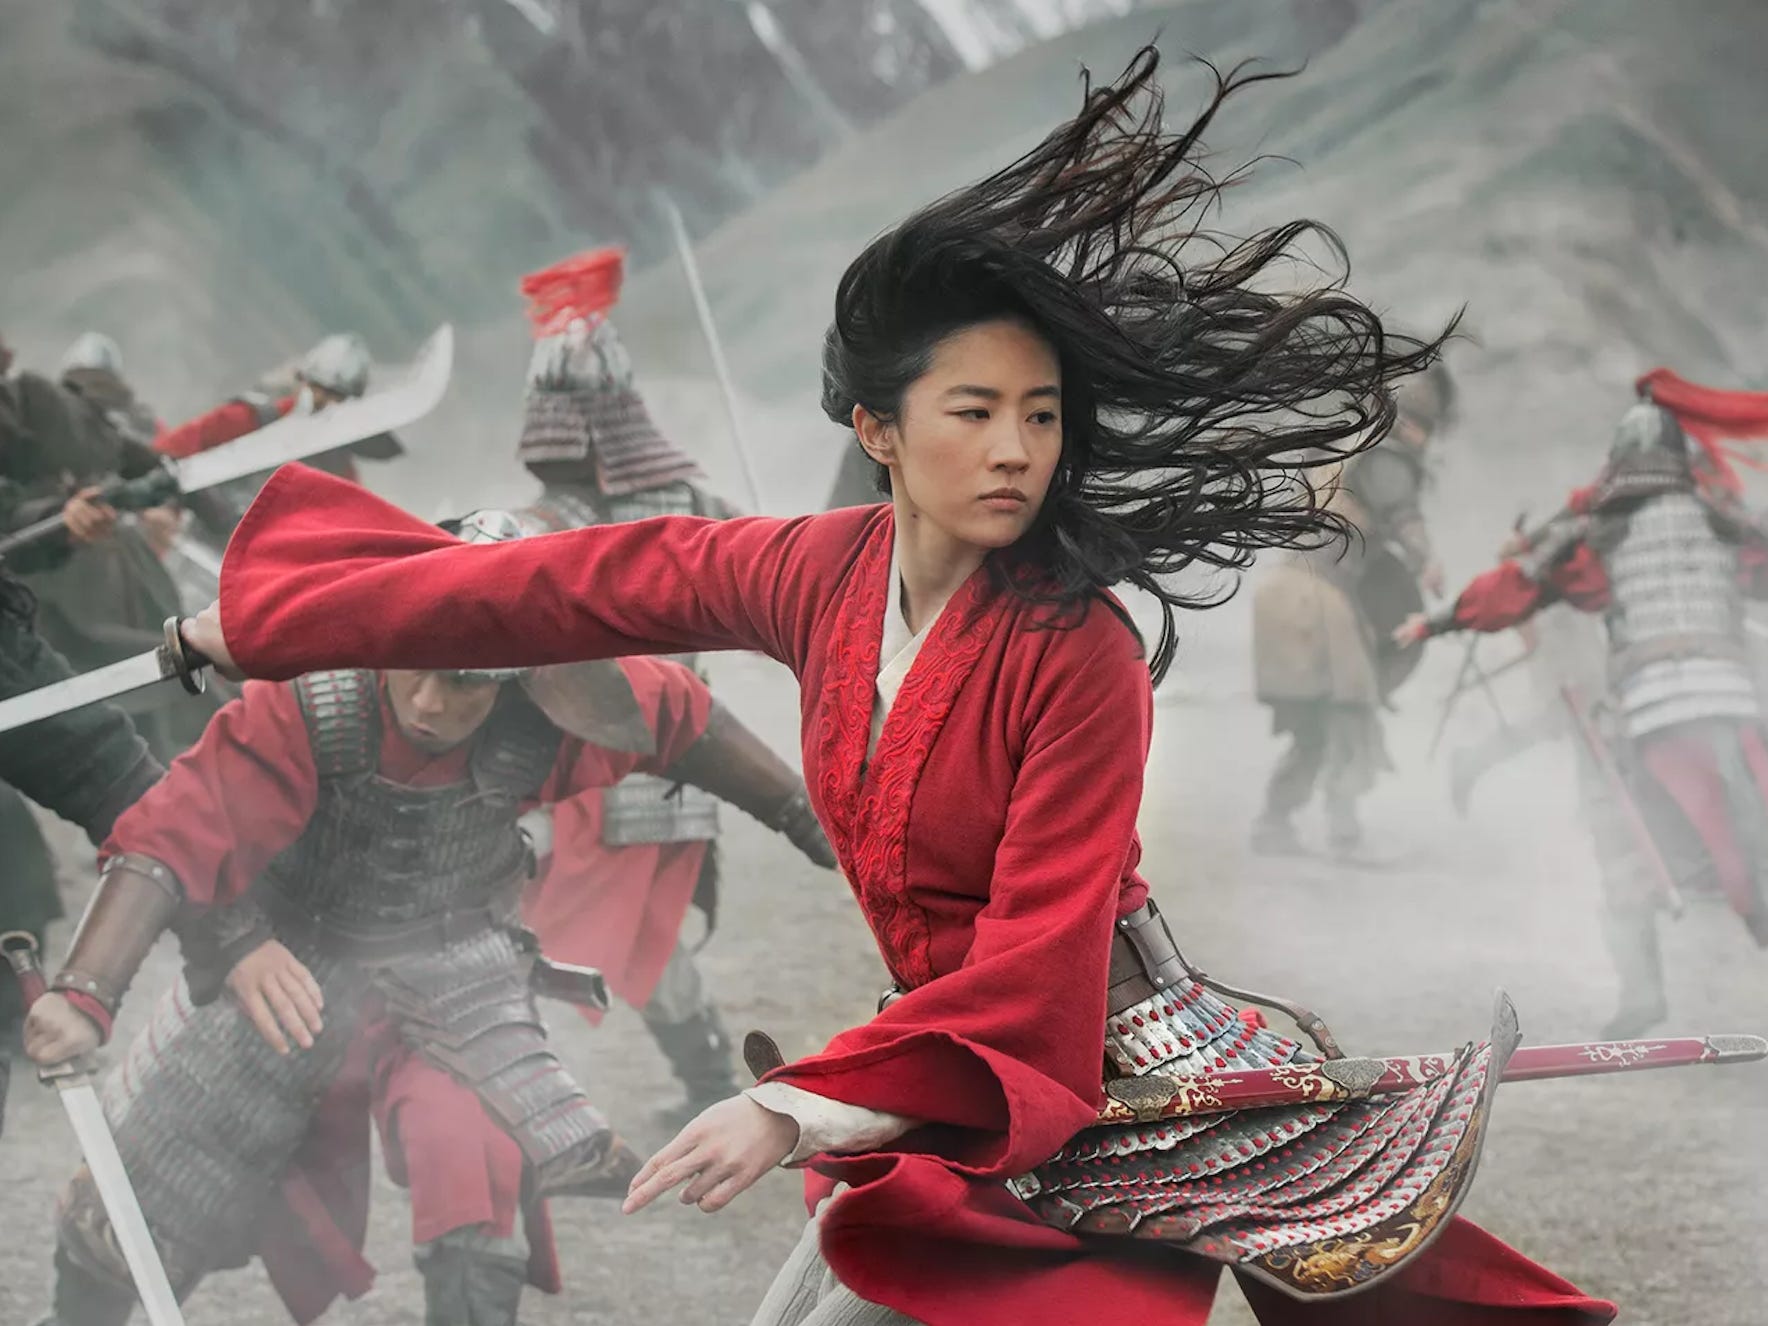 <p>"Mulan" is the live-action remake that was released during the pandemic, so we'll never know how it would have fared at the box office.</p><p>But we're betting it would have done well. "<a href="https://www.businessinsider.com/disney-live-action-mulan-movie-review">Mulan</a>" is a true action movie, which fits well with the subject matter, as Mulan secretly takes her father's place in the Chinese army.</p><p>The 1998 original film has some of the best Disney songs ("Reflection," "I'll Make a Man Out of You," "Honor to Us All"), but the remake wisely <a href="https://www.businessinsider.com/disney-mulan-live-action-differences-from-animated-movie-2020-9">removes them</a>, as the tonal shift from hilarious songs to gritty action would be too jarring. Instead, the songs are subtly worked into the score.</p><p>We also like the addition of Xianniang, a witch who identifies with Mulan's feelings that she doesn't belong. Mulan has no female friends at all in the original, and while these two aren't friends, there's a kinship and respect between the two.</p>